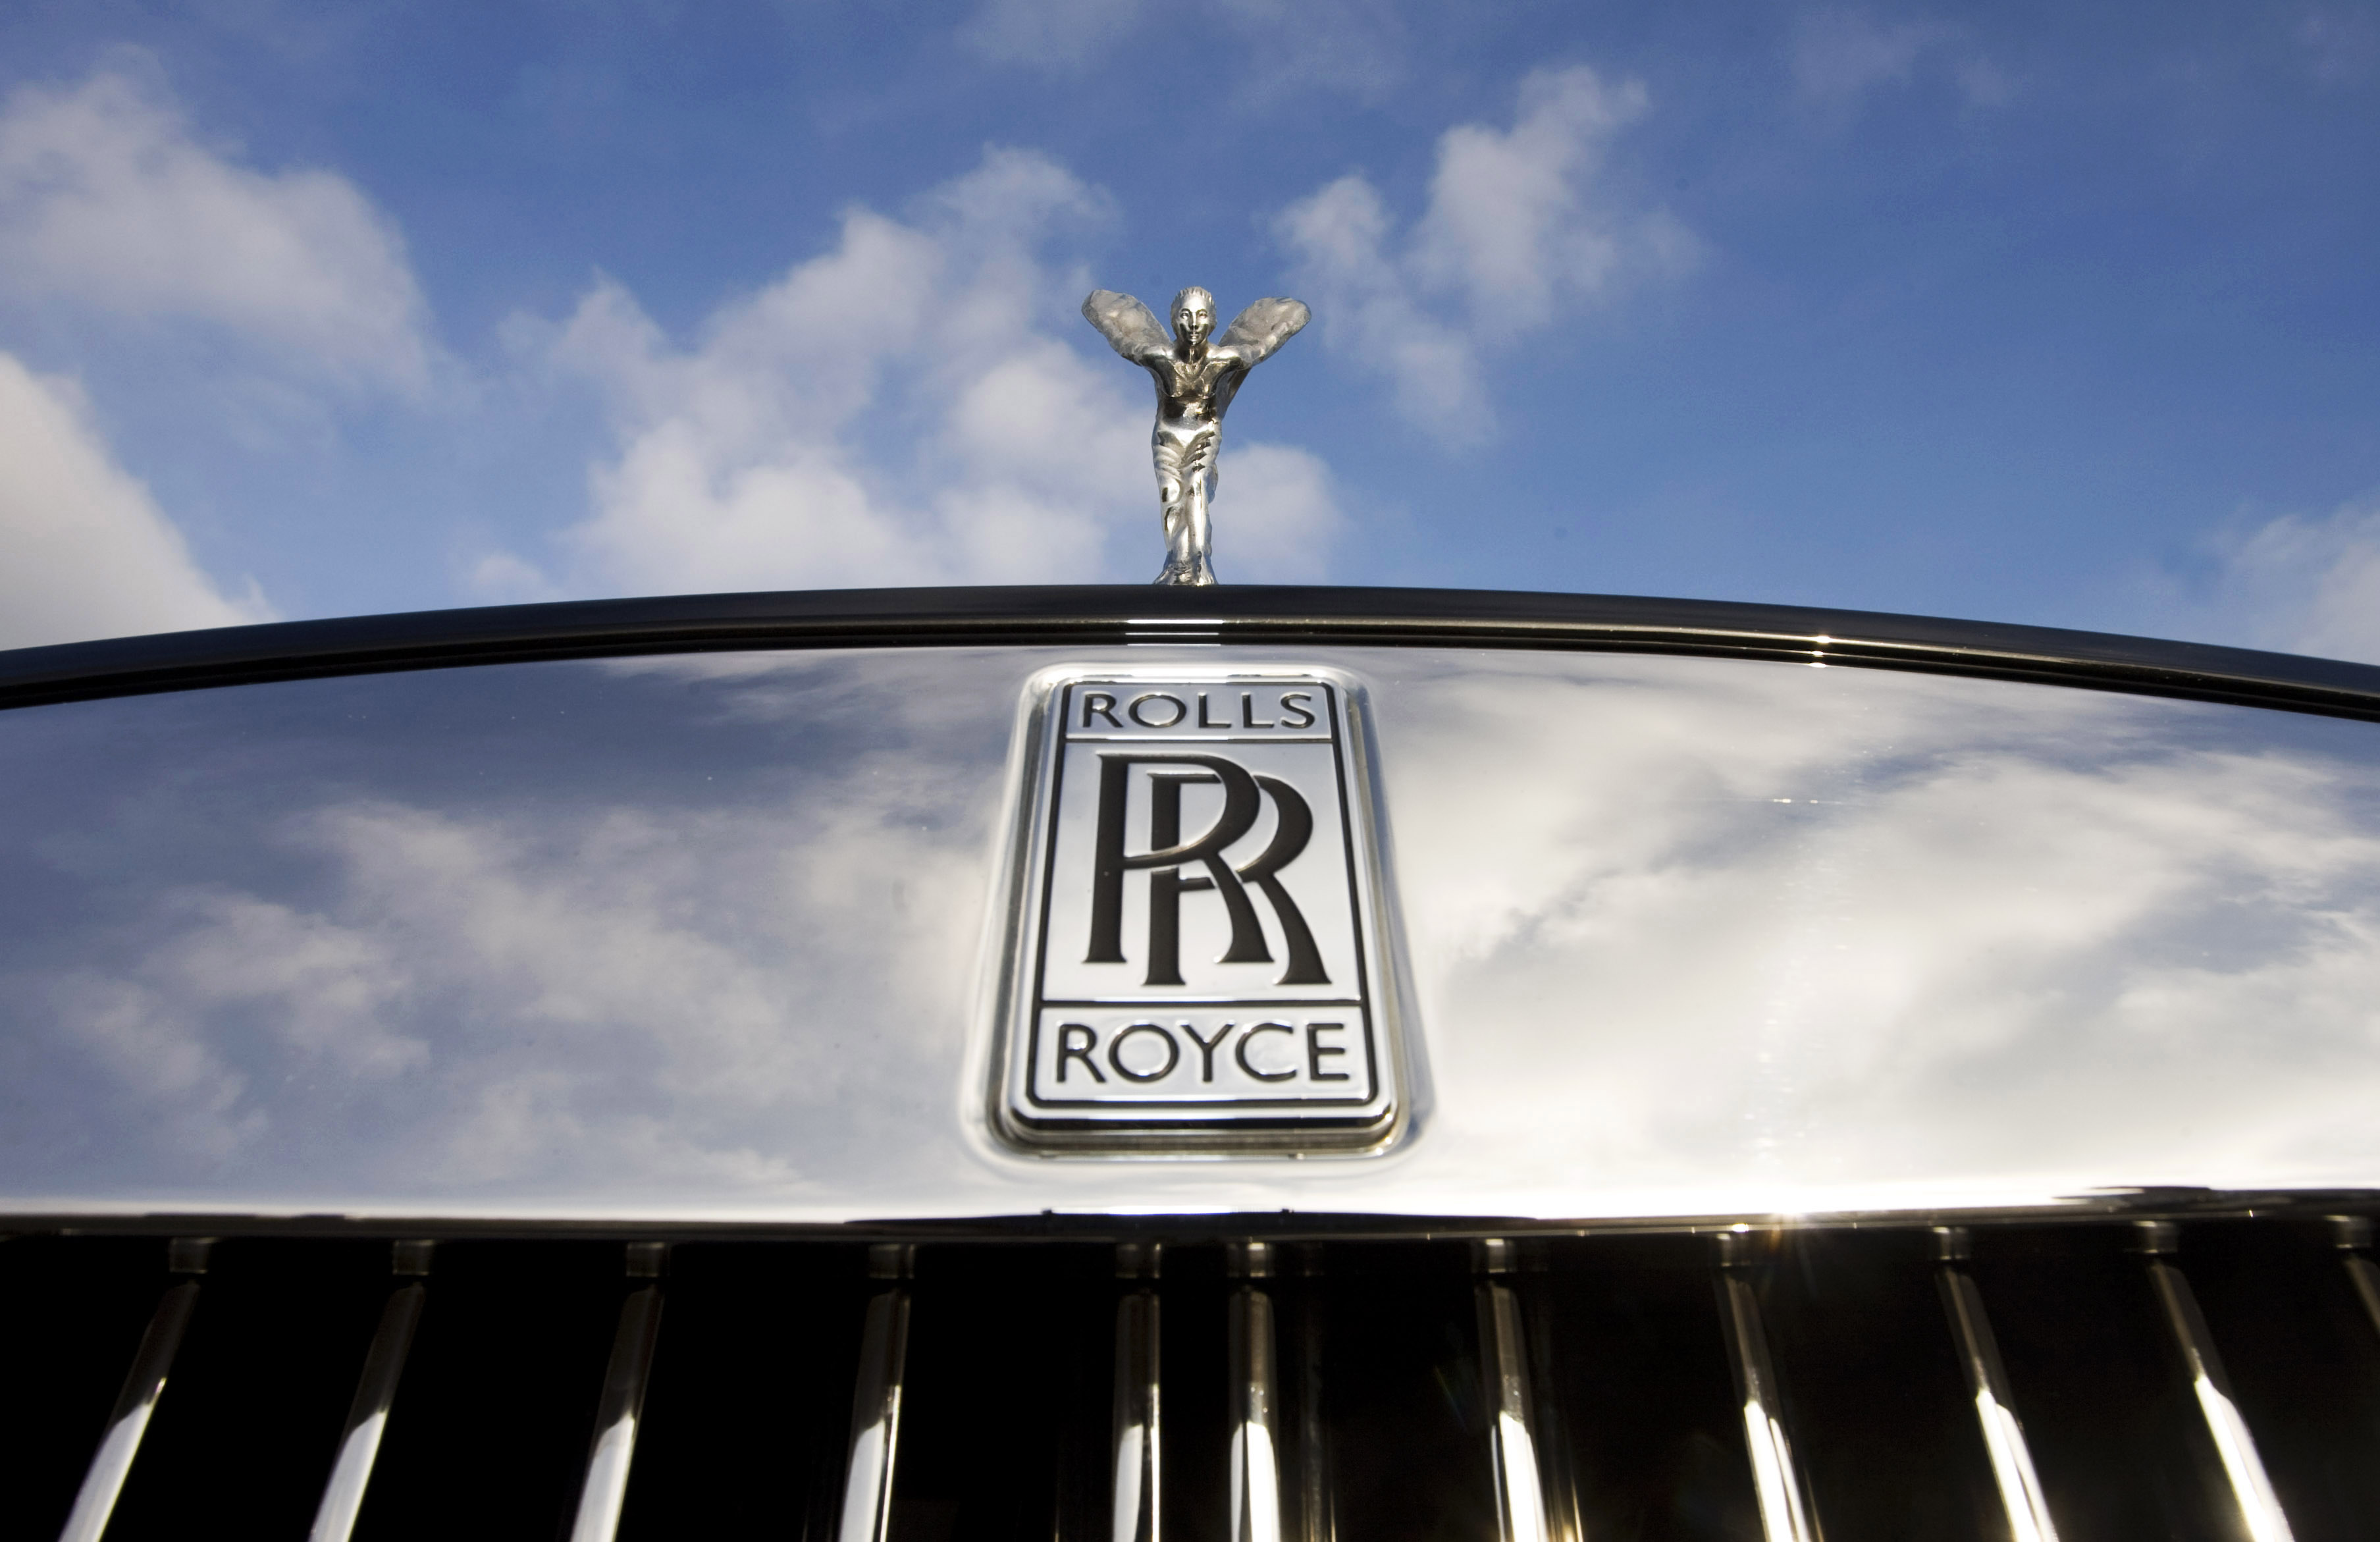 Rolls-Royce on X: Today we honour the service & sacrifice of those who  gave so much for our freedom. We salute our Armed Forces for their  continuous hard work & bravery protecting